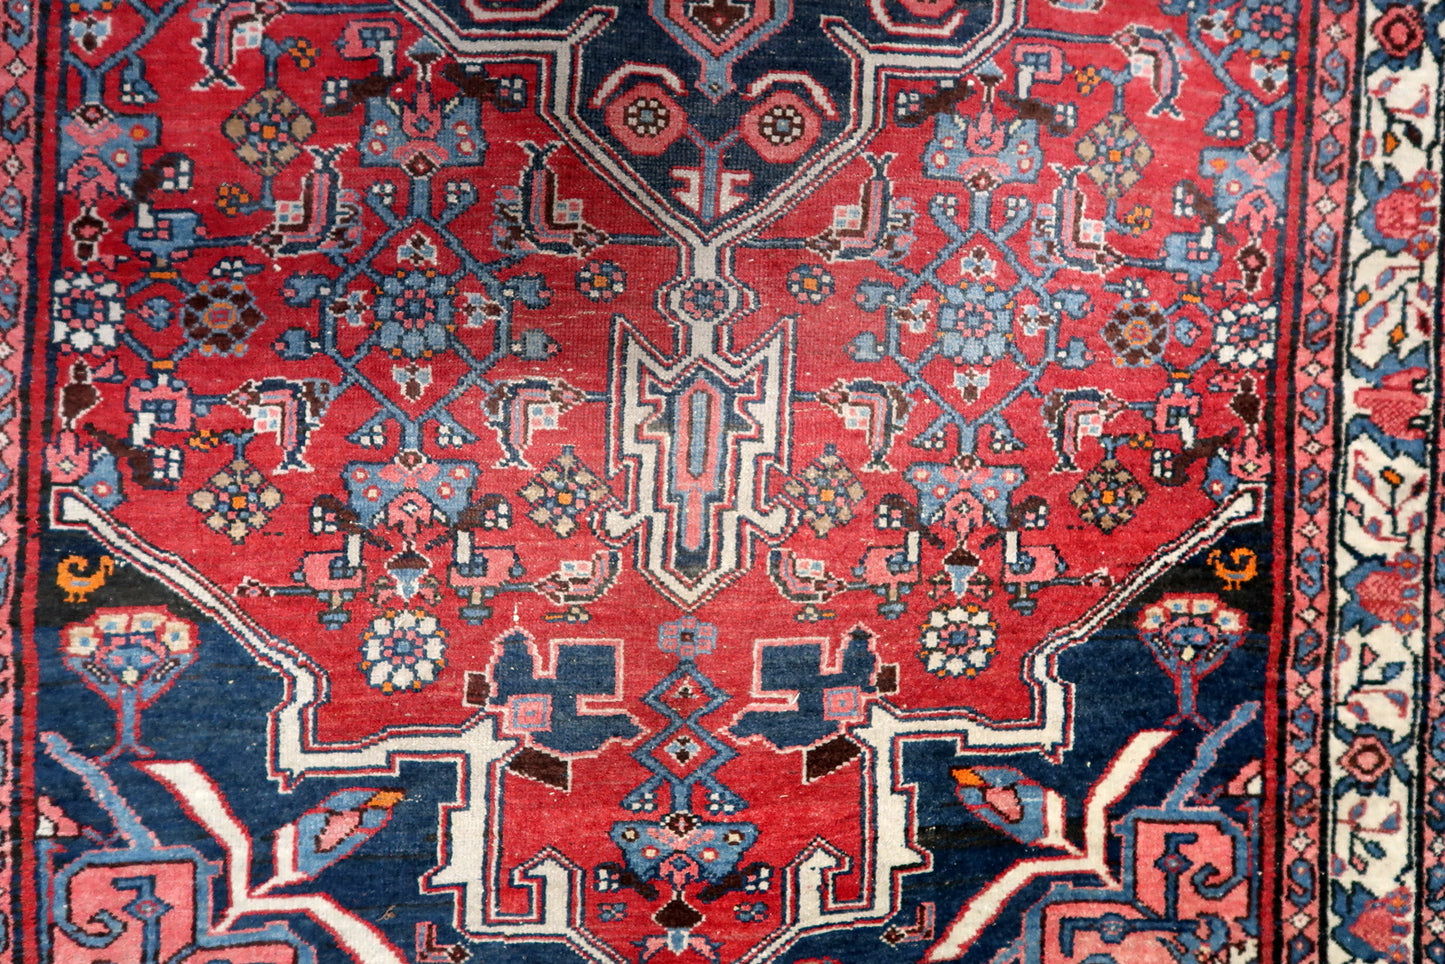 Close-up of navy blue accents on Handmade Vintage Persian Bidjar Rug - Detailed view emphasizing the navy blue accents adding depth to the rug's design.